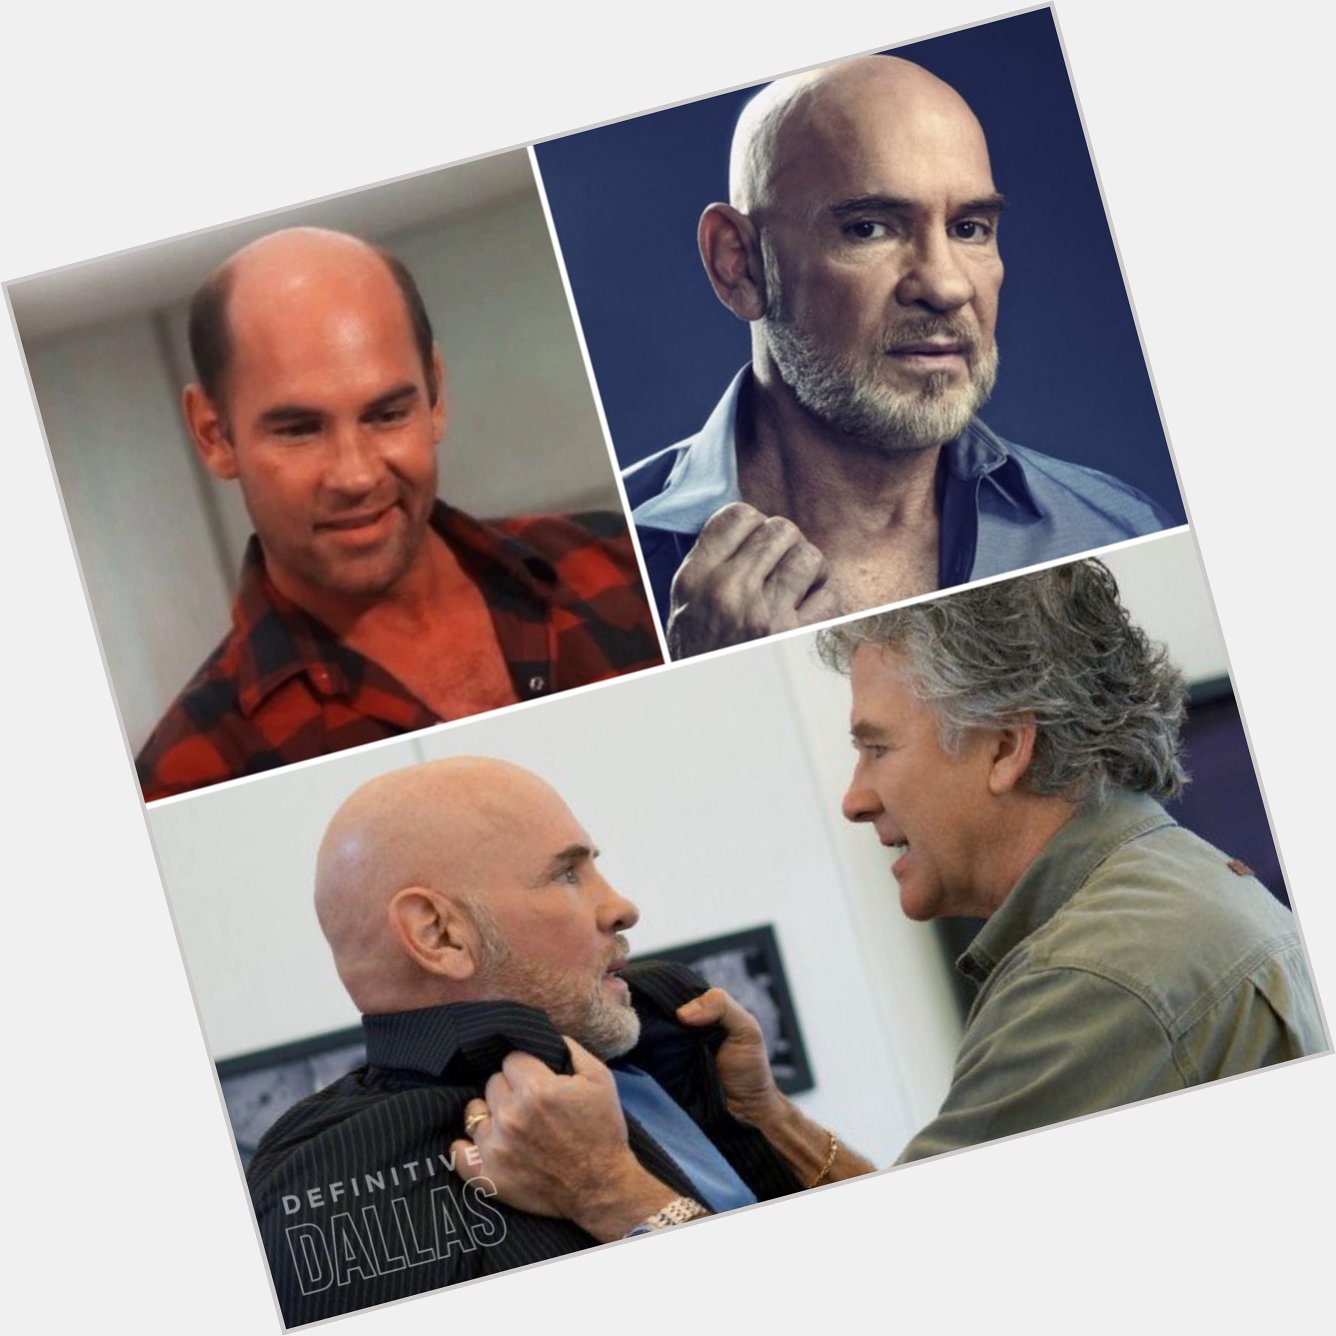 Happy birthday to Mitch Pileggi! He was born on this day in 1952. 